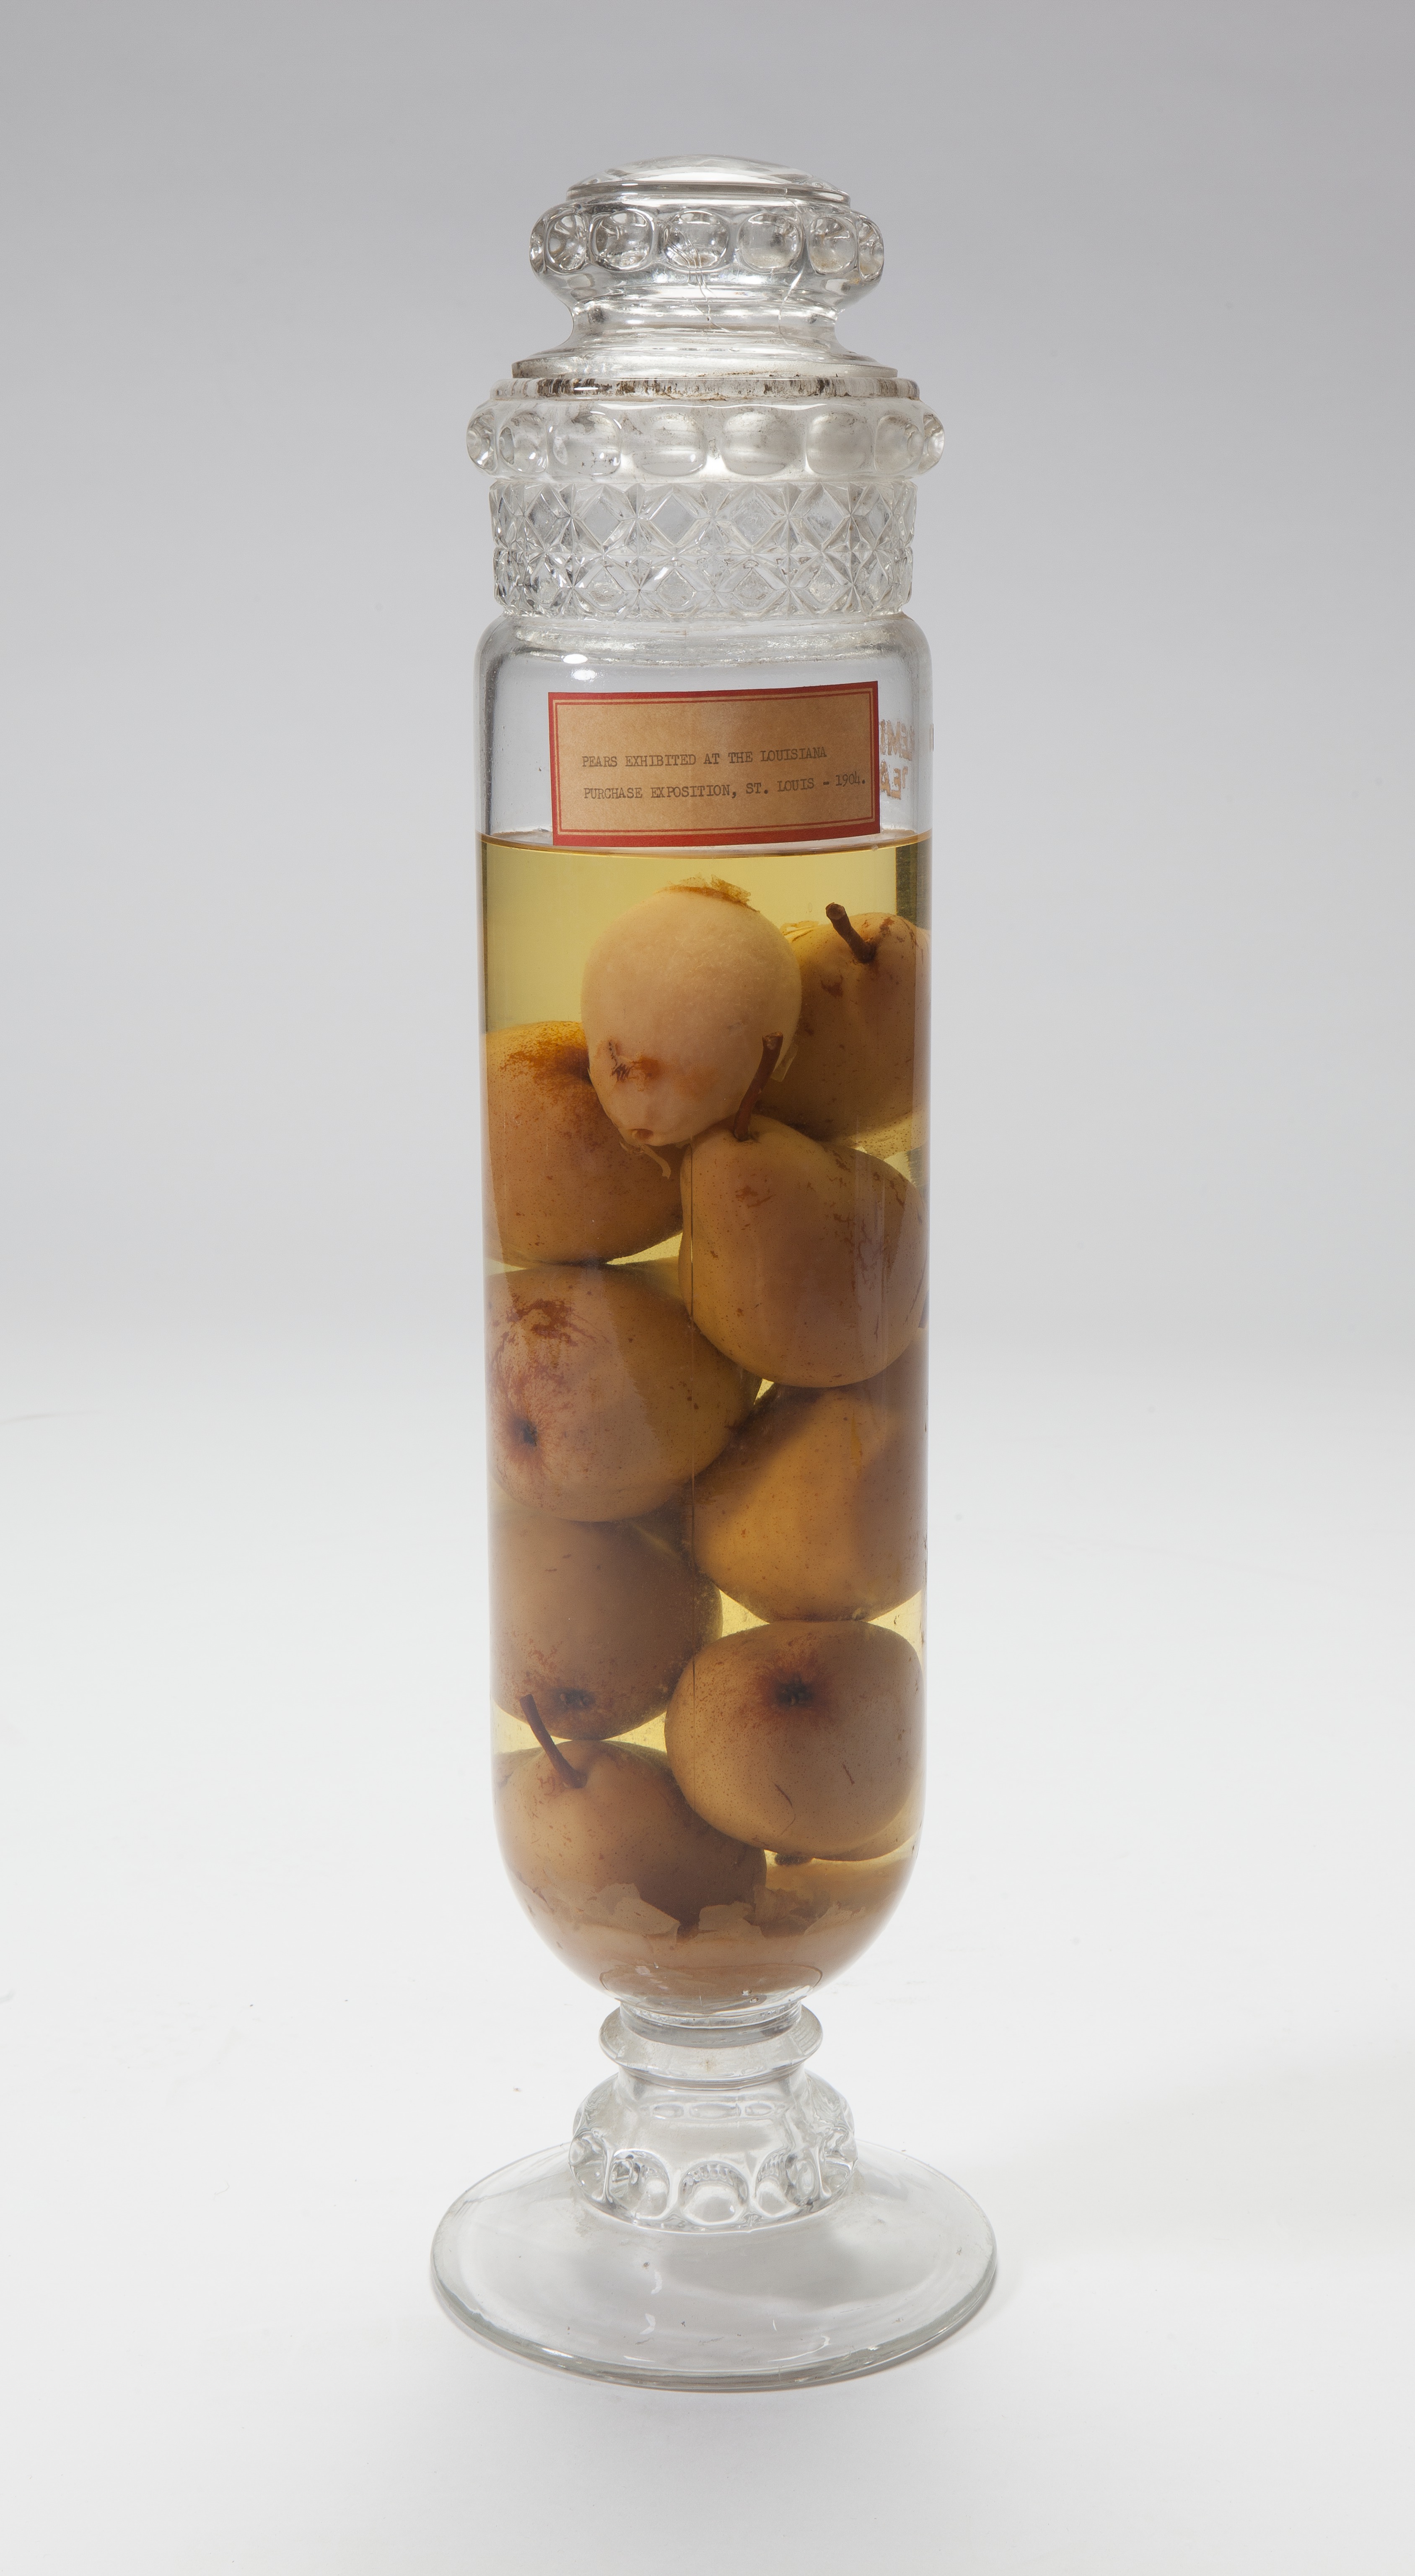 Glass display bottle containing preserved pears from the 1904 World's Fair in St. Louis, Missouri.jpg